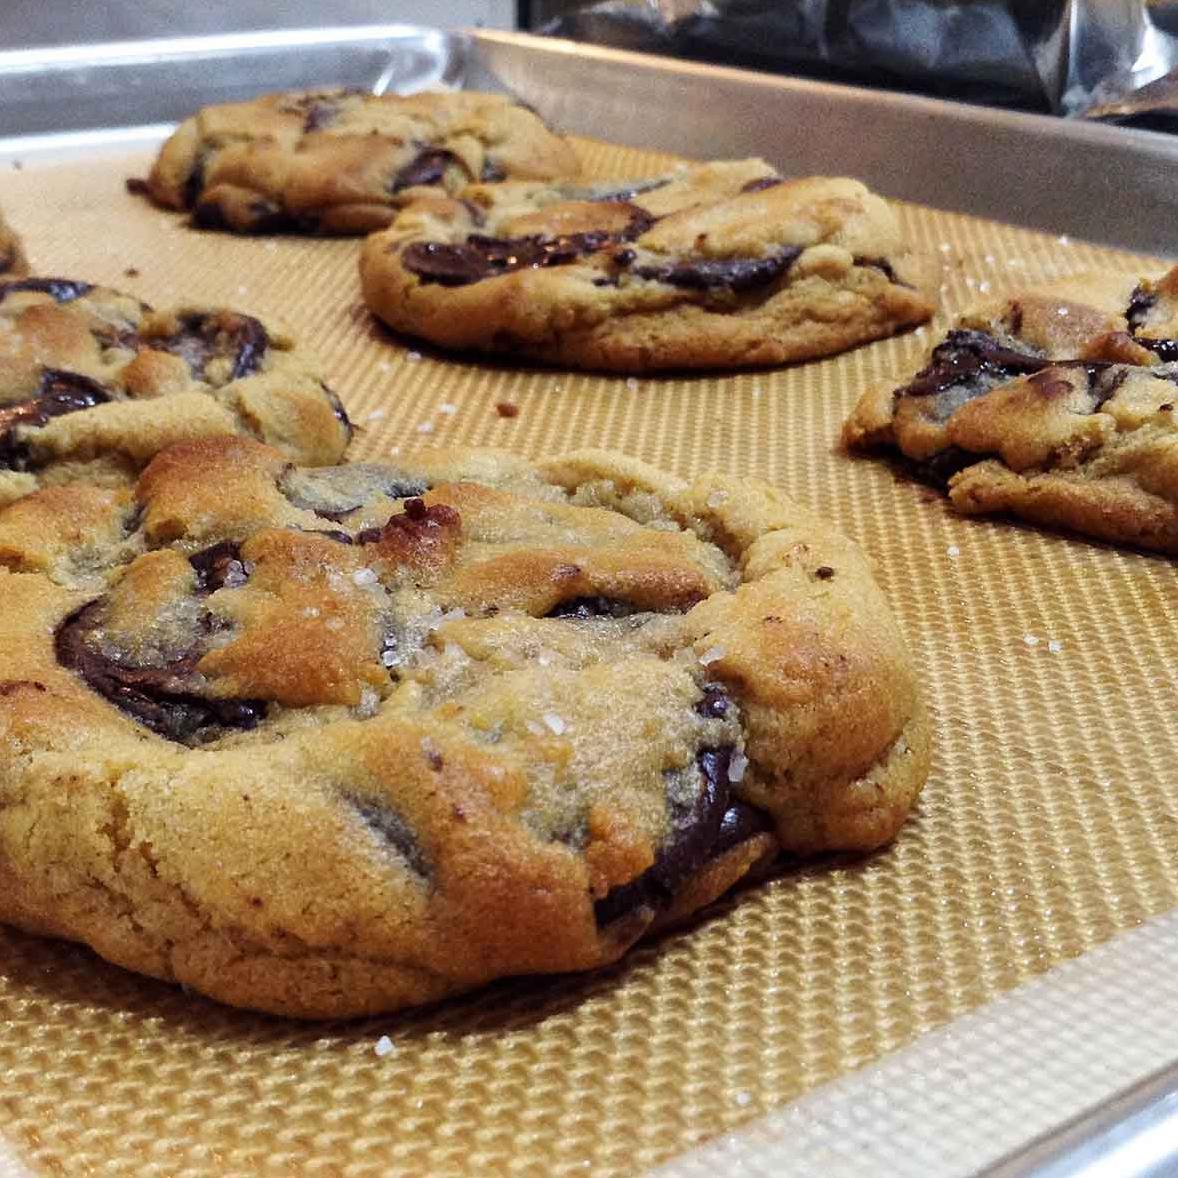  Satisfy your sweet tooth with these gluten-free chocolate chip cookies by David Leitte